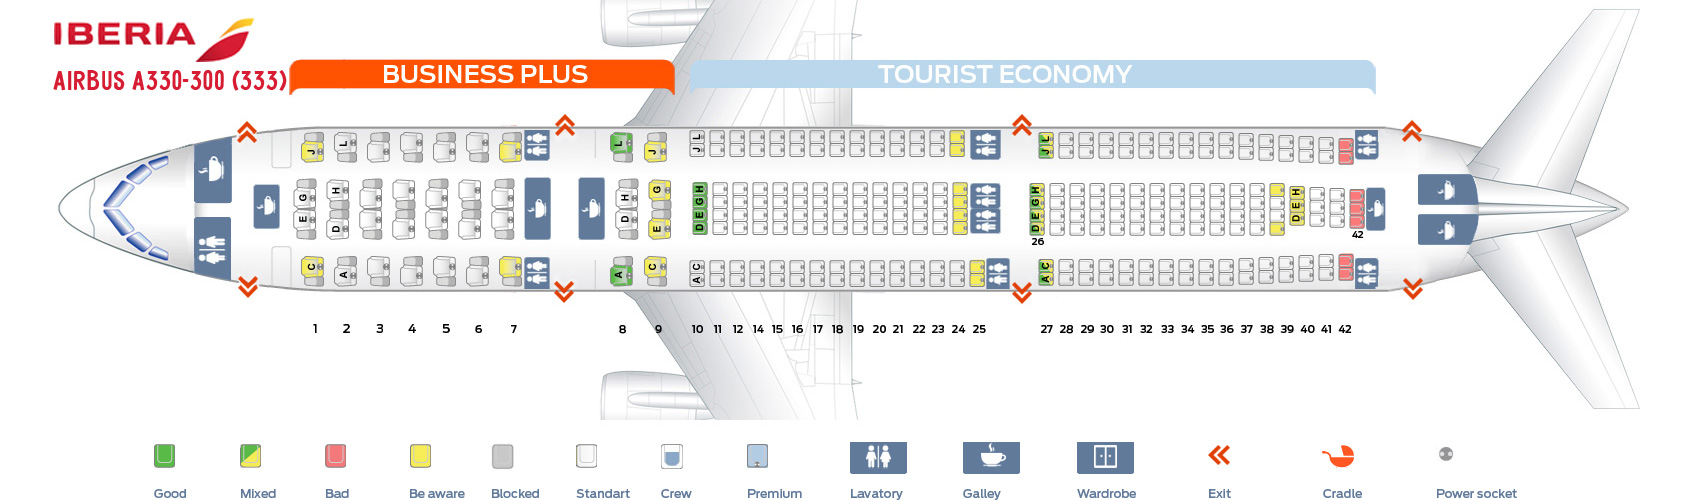 Seat map Airbus A330300 Iberia. Best seats in the plane